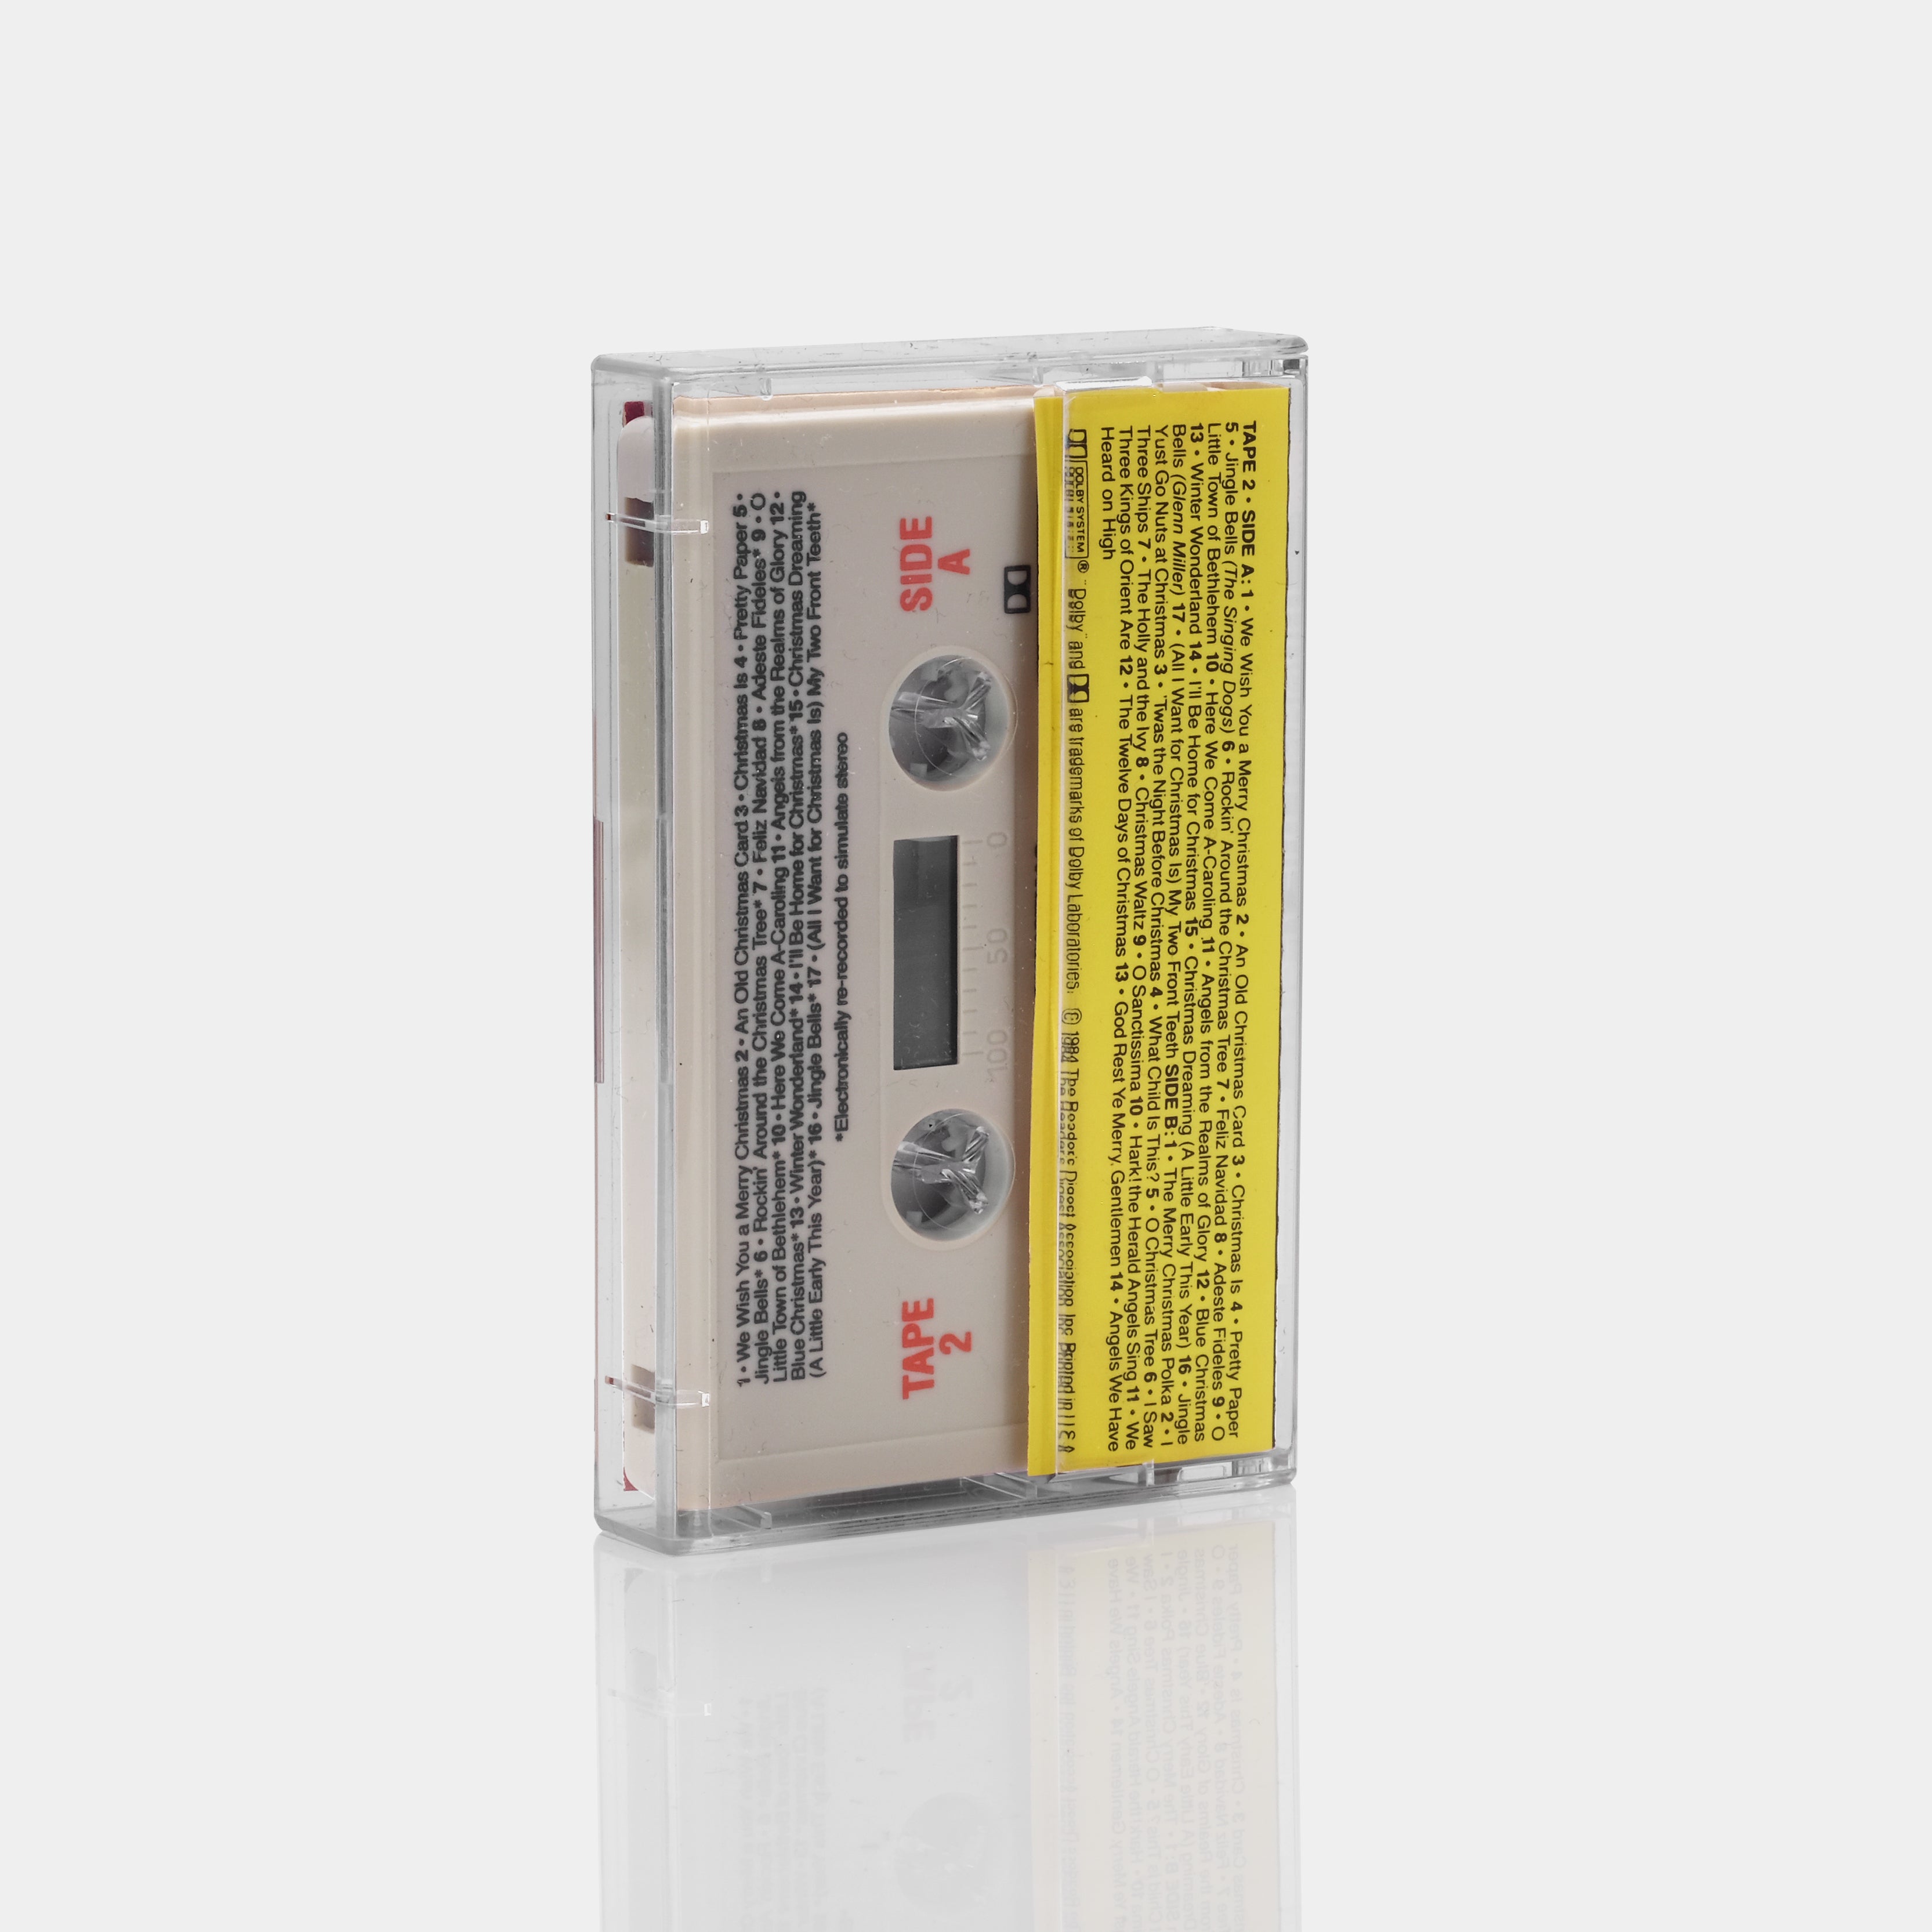 Christmas Through The Years Cassette Tape